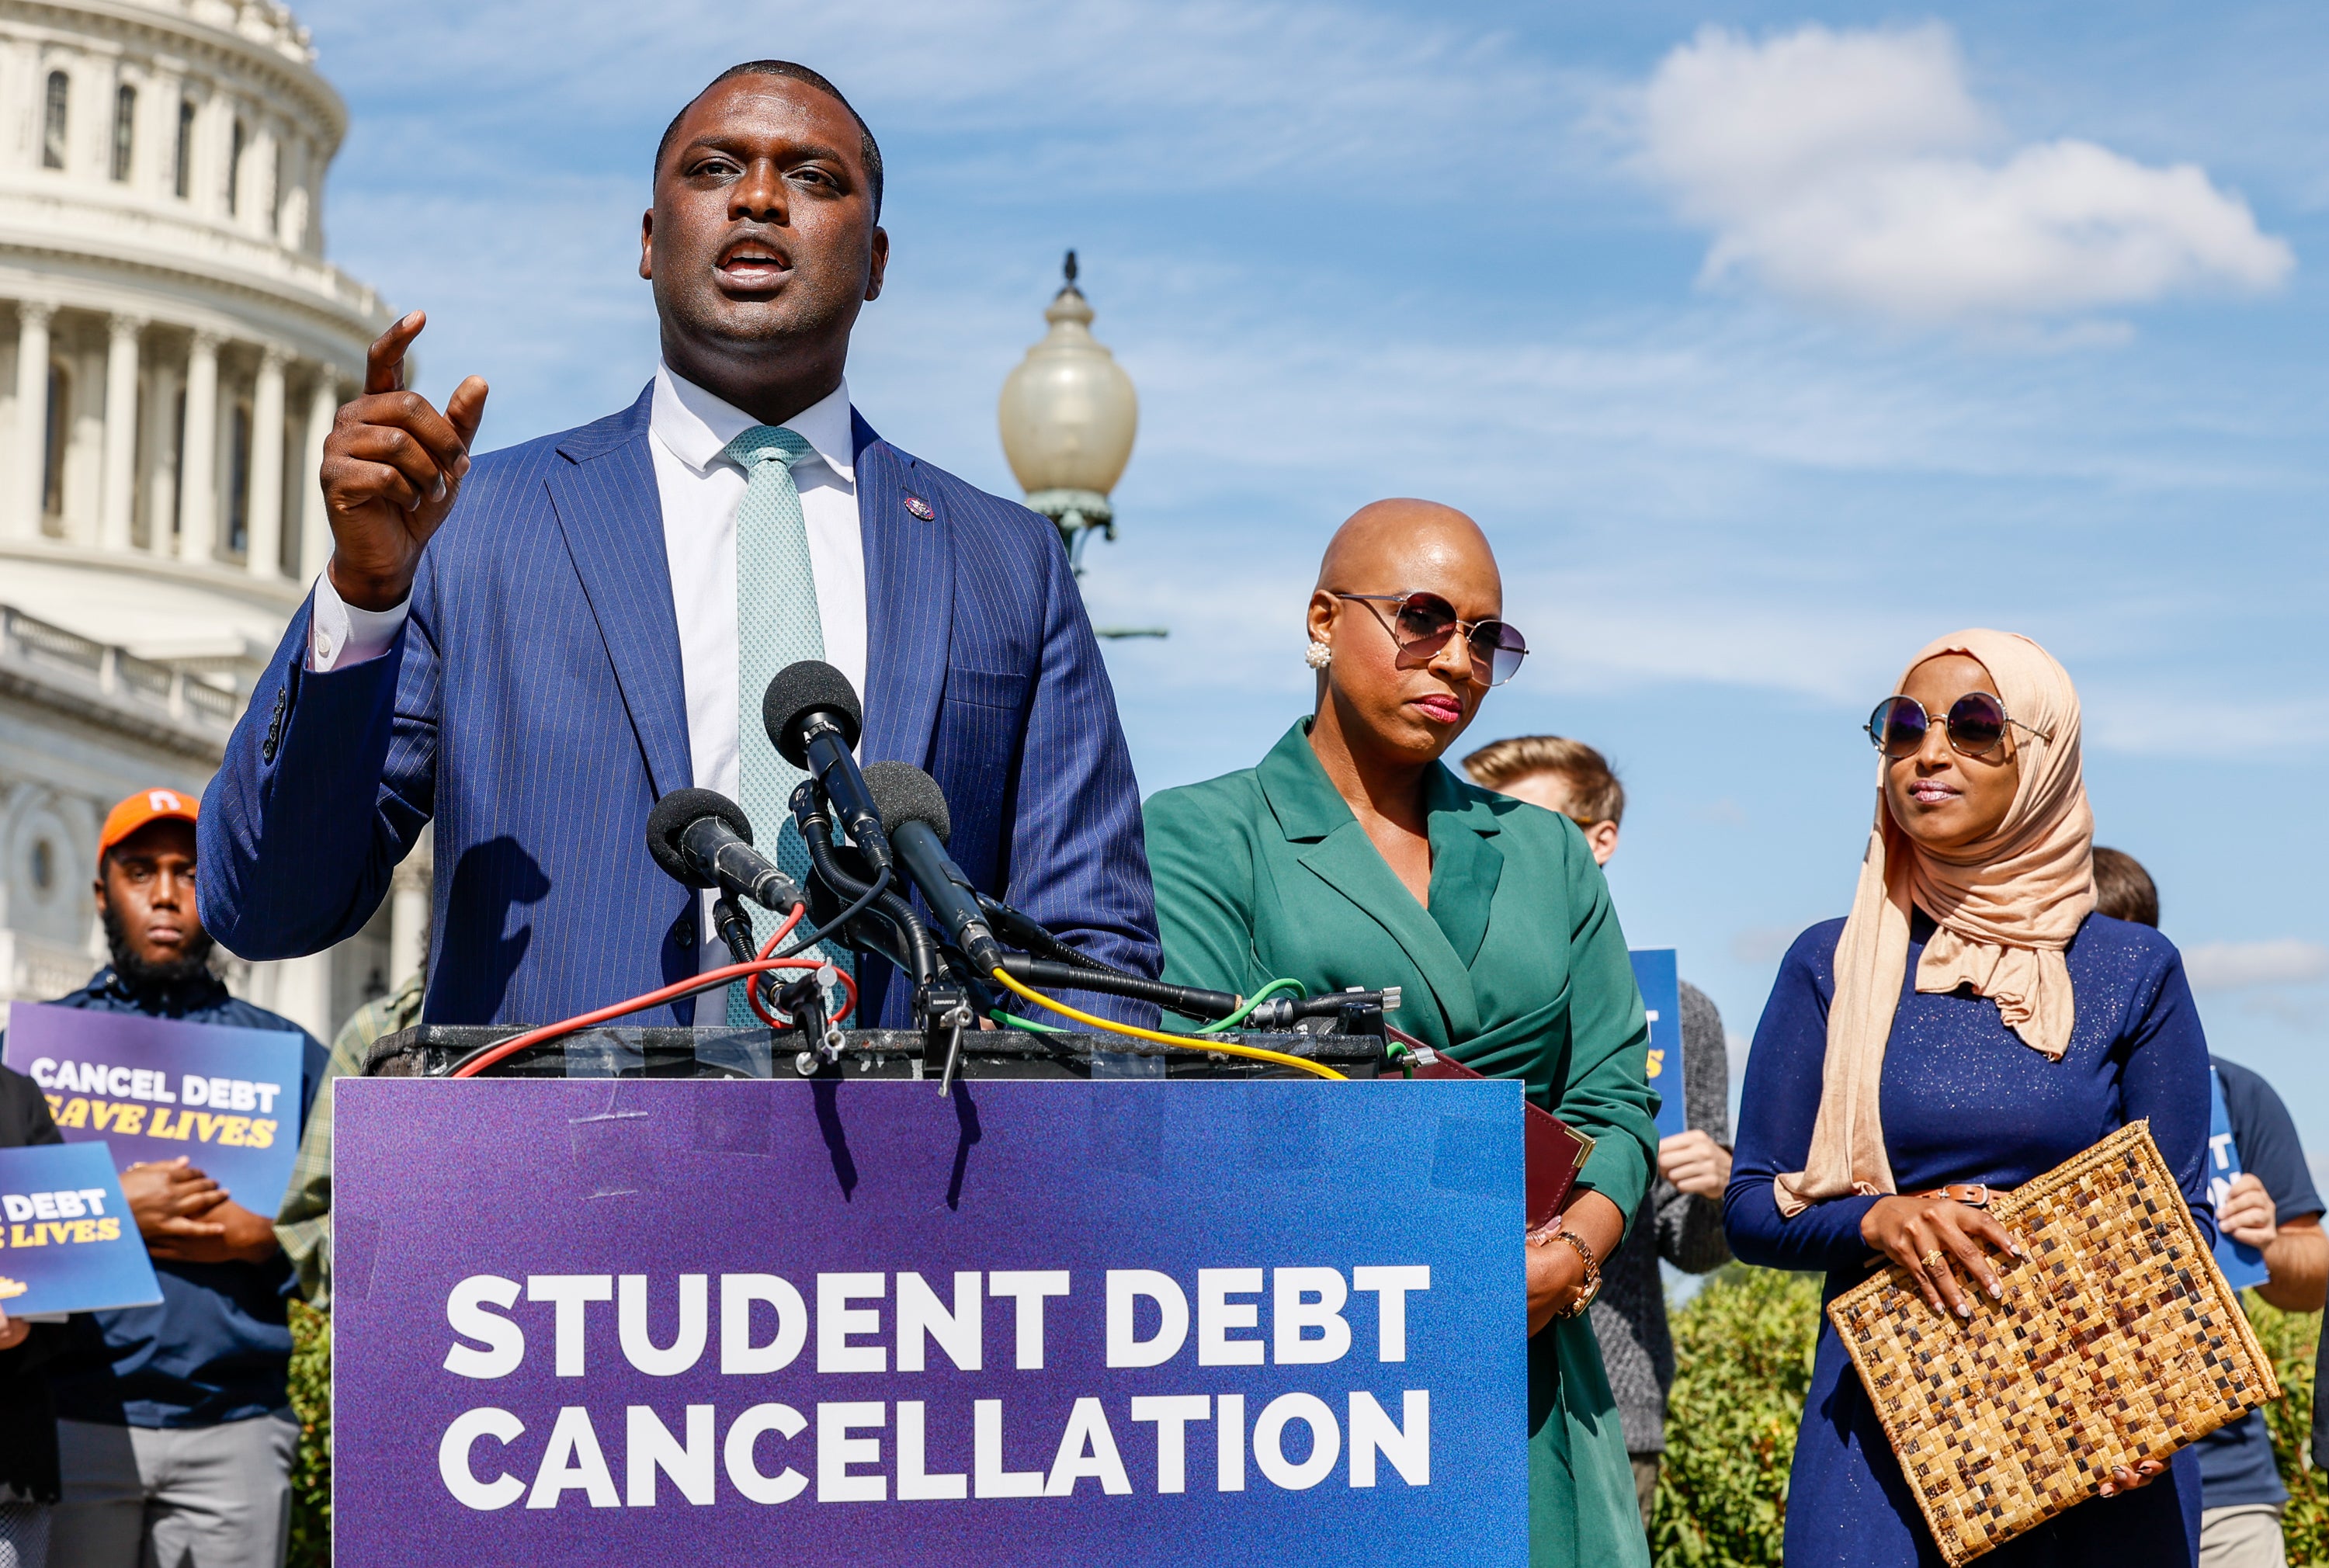 Rep. Mondaire Jones (D-NY) speaks during a press conference held to celebrate U.S. President Joe Biden cancelling student debt on Capitol Hill on September 29, 2022 in Washington, DC